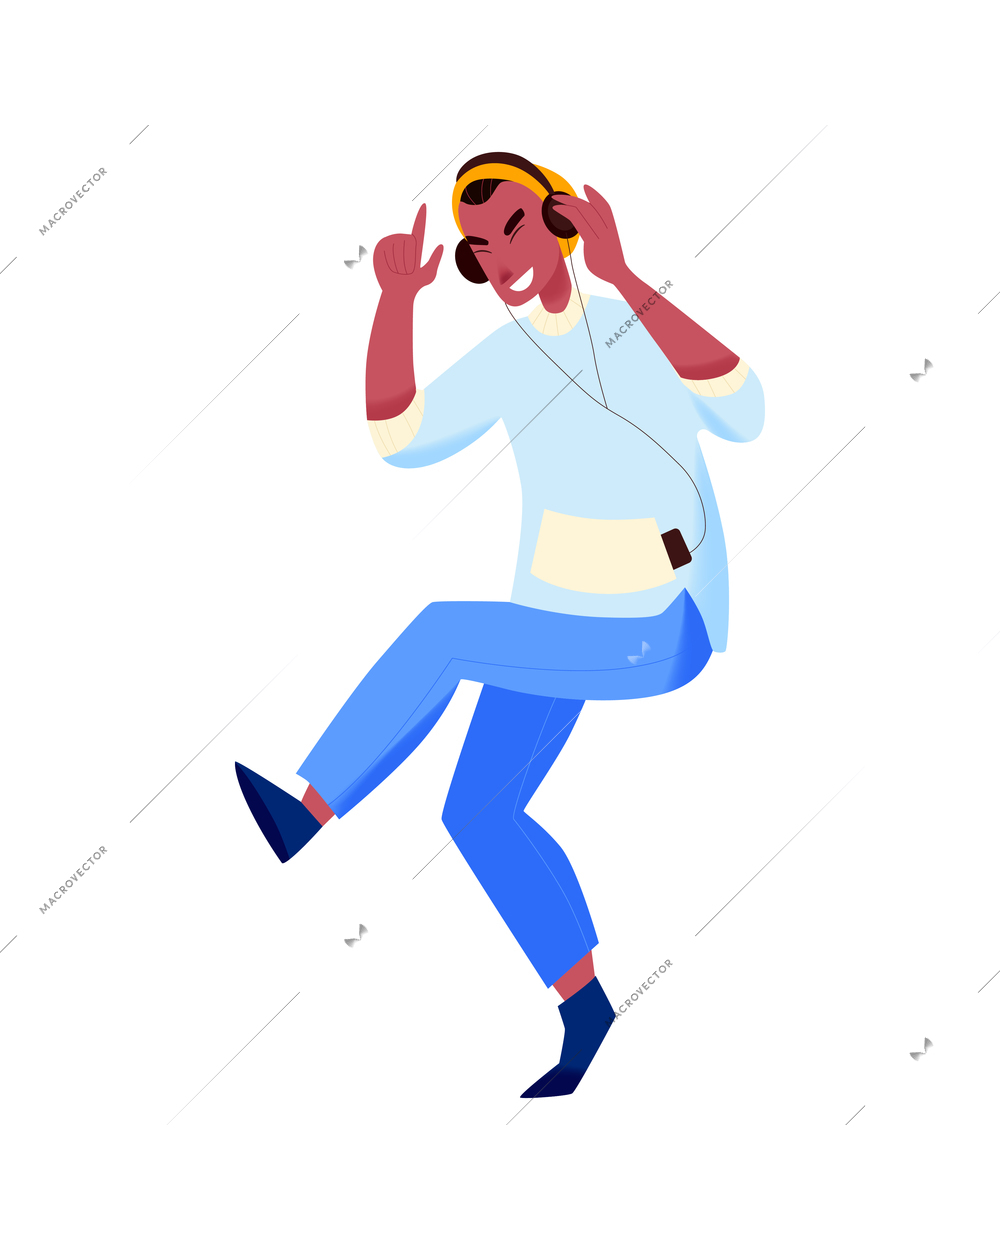 People headphones listen music composition with isolated human character of guy dancing in headphone vector illustration